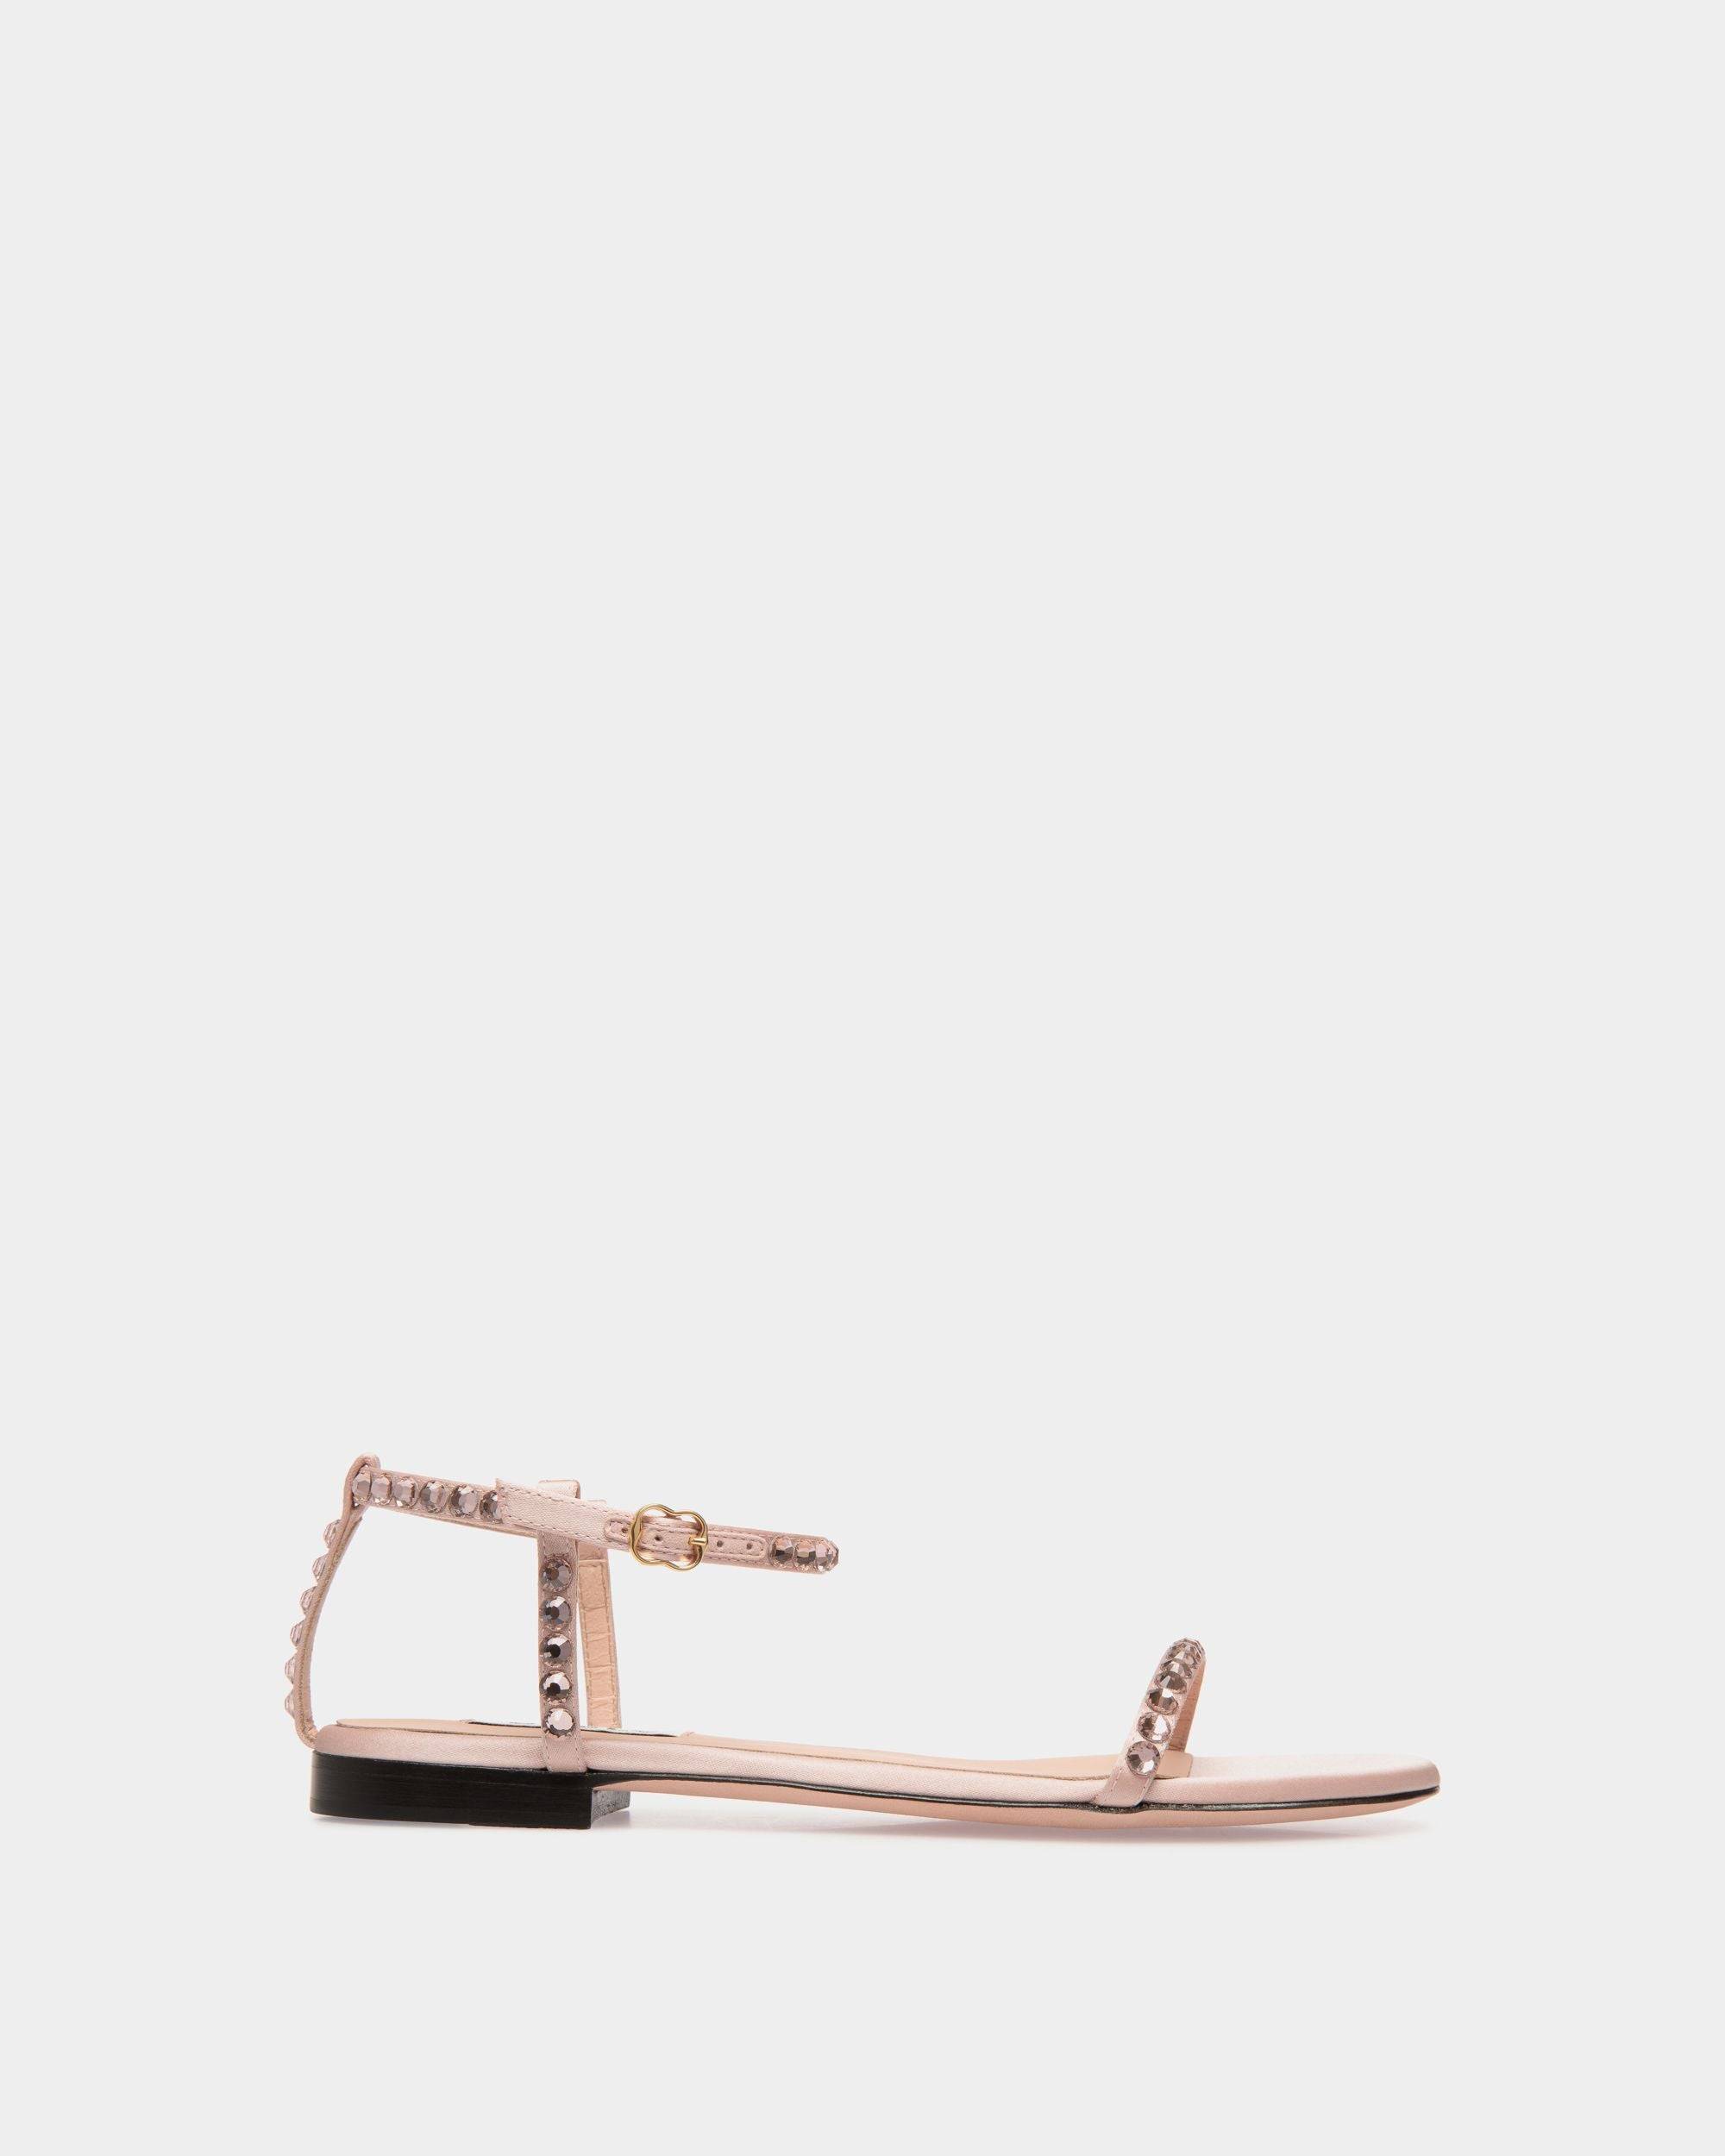 Katy Flat Sandal in Light Pink Fabric with Crystals - Women's - Bally - 01